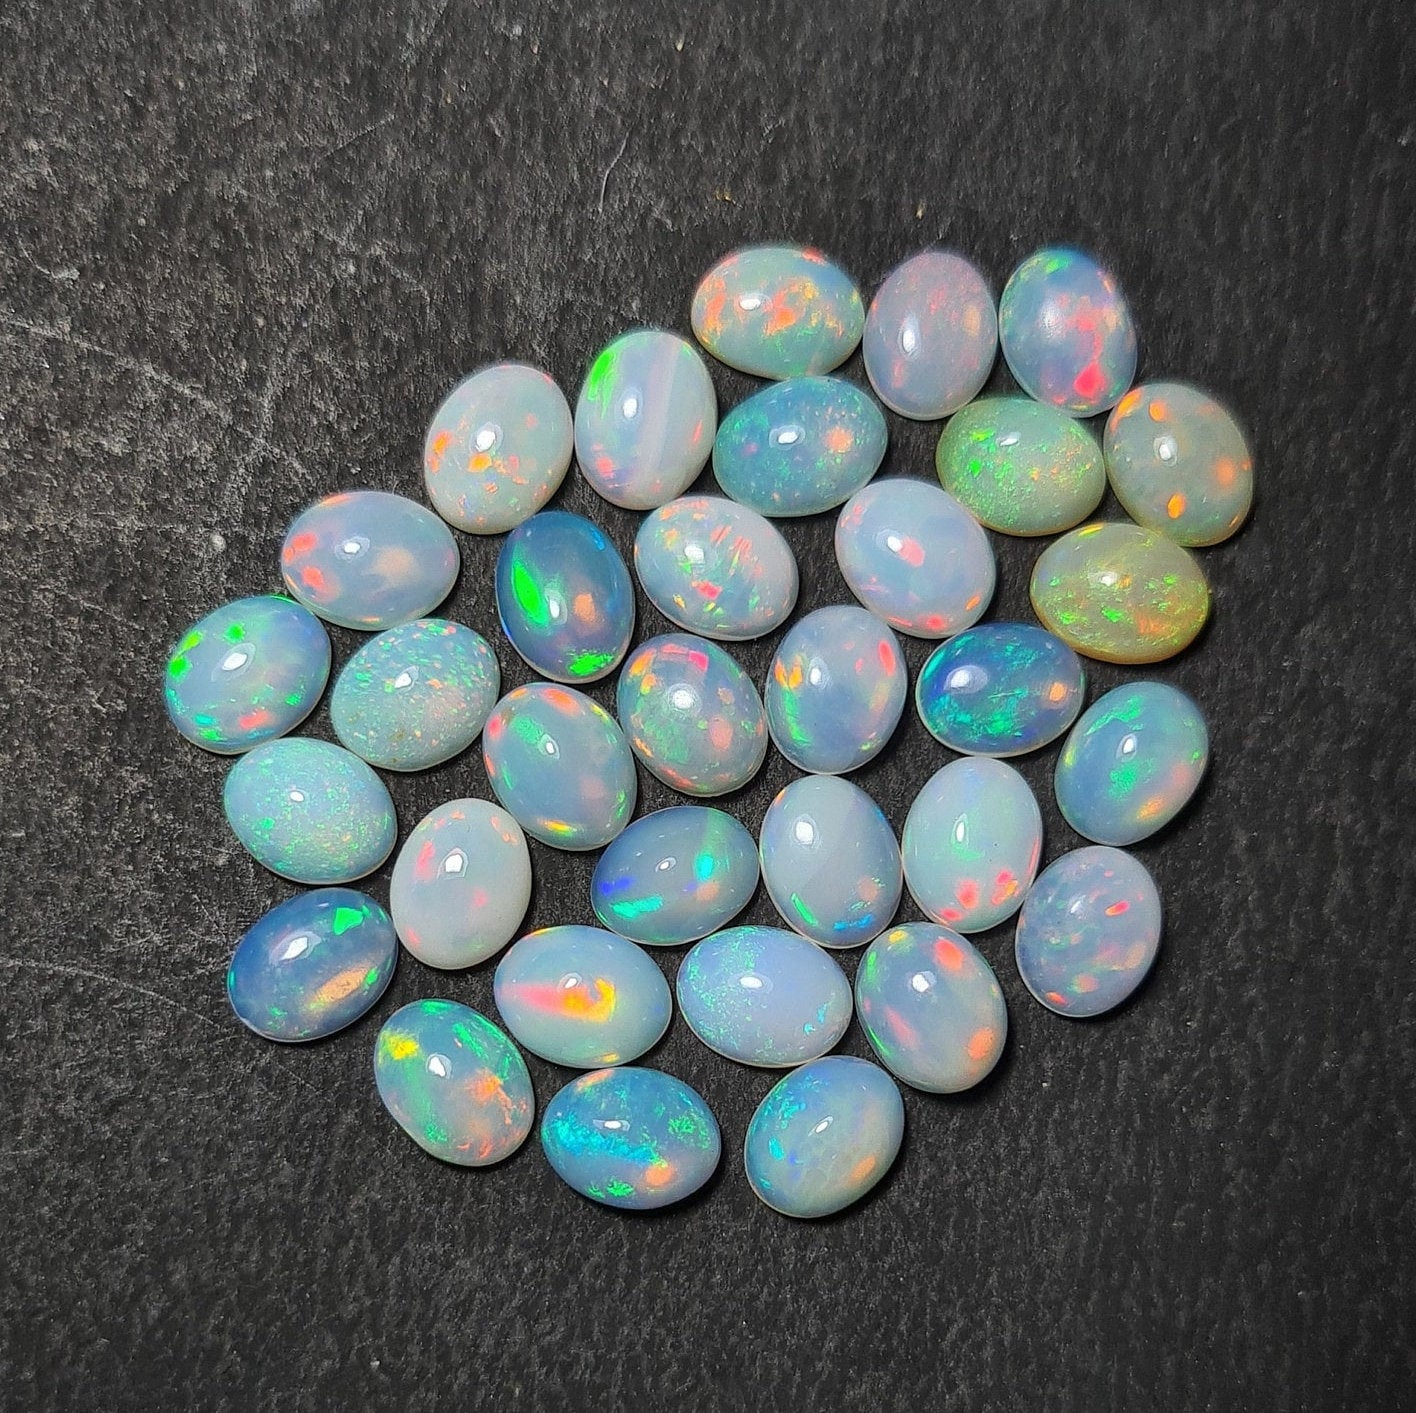 Natural Ethiopian Opal 7x10 mm Oval Gemstone Cabochon, Calibrated Opal Stone, Multi Fire Opal Loose Stone For Jewelry Making. (Natural)